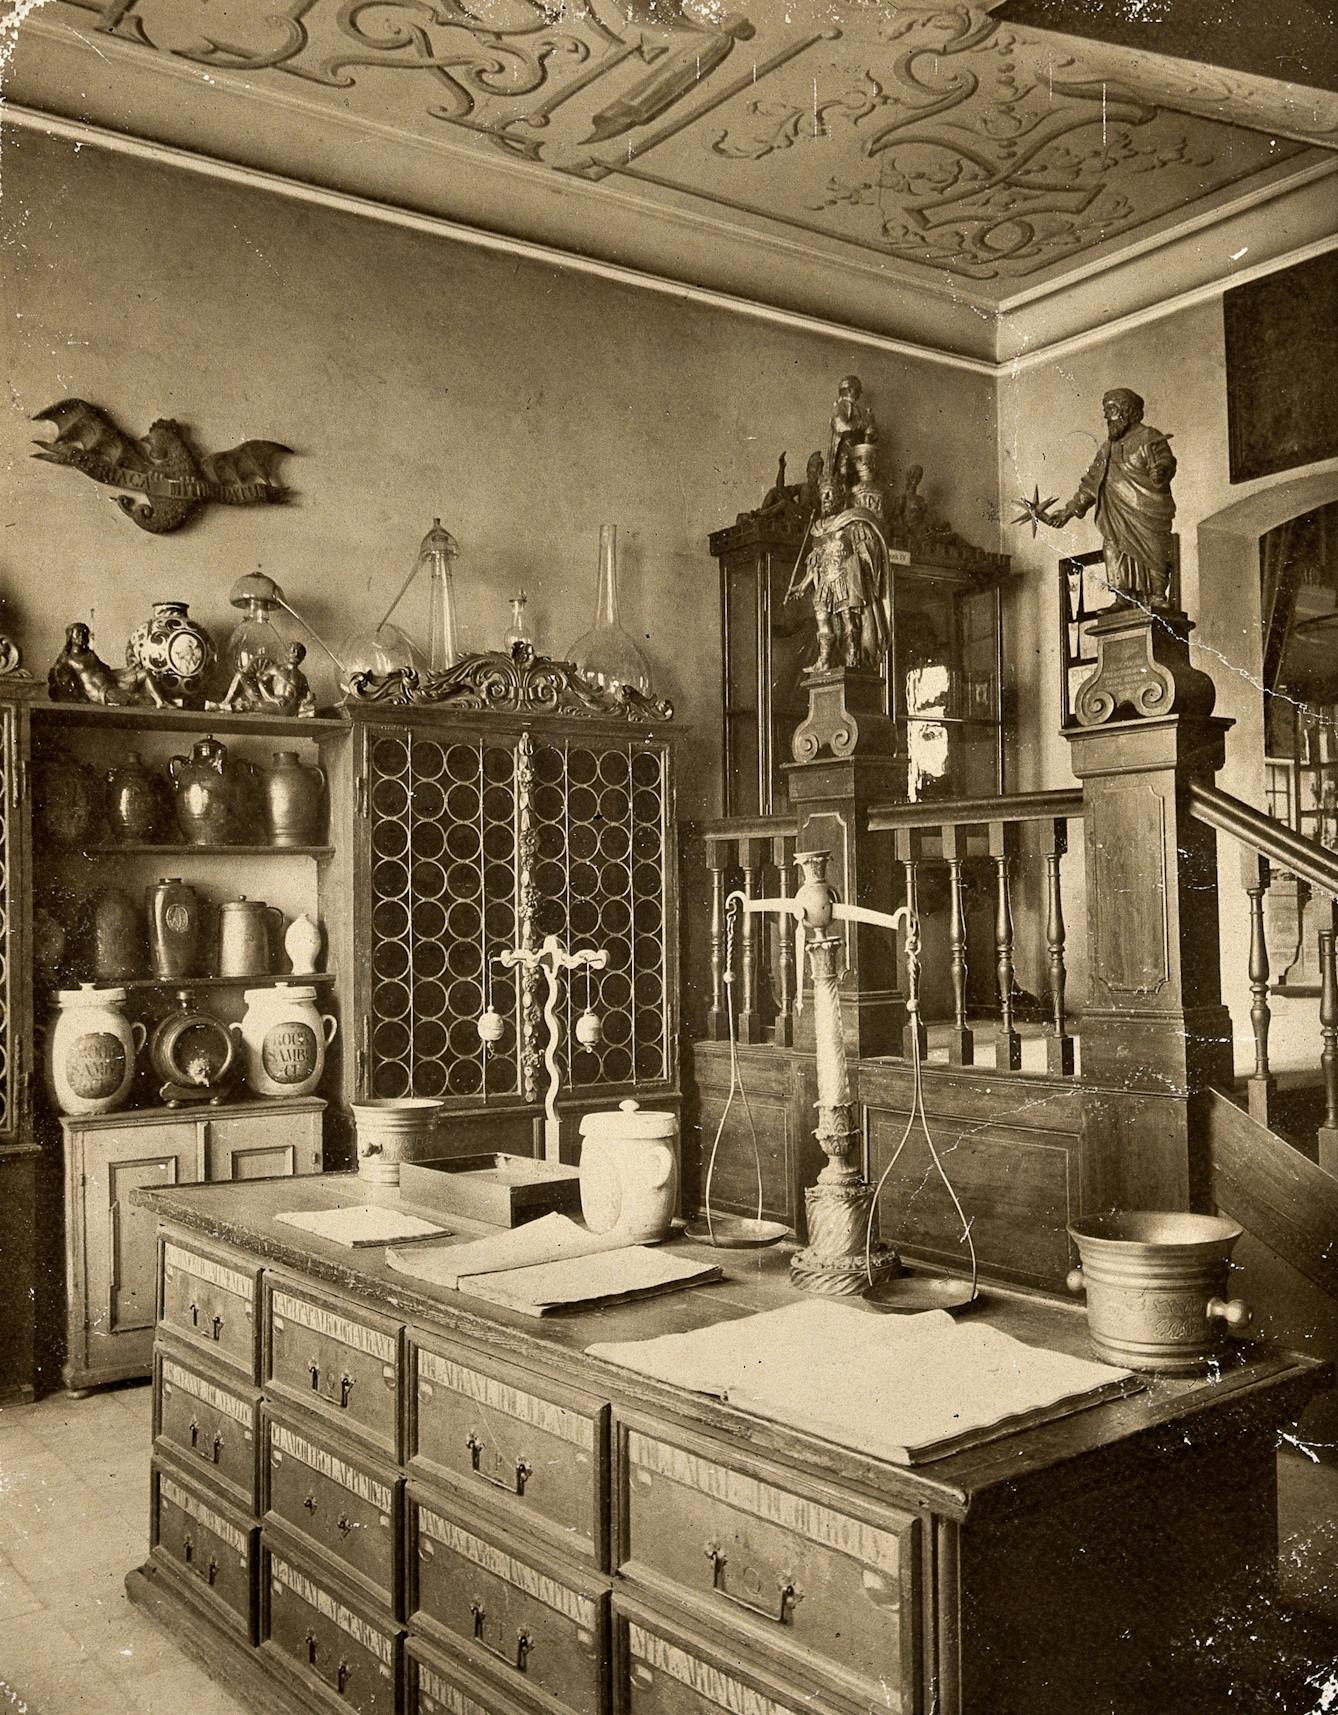 The interior of a seventeenth-century apothecary's shop recreated for the German National Museum in Nürnberg